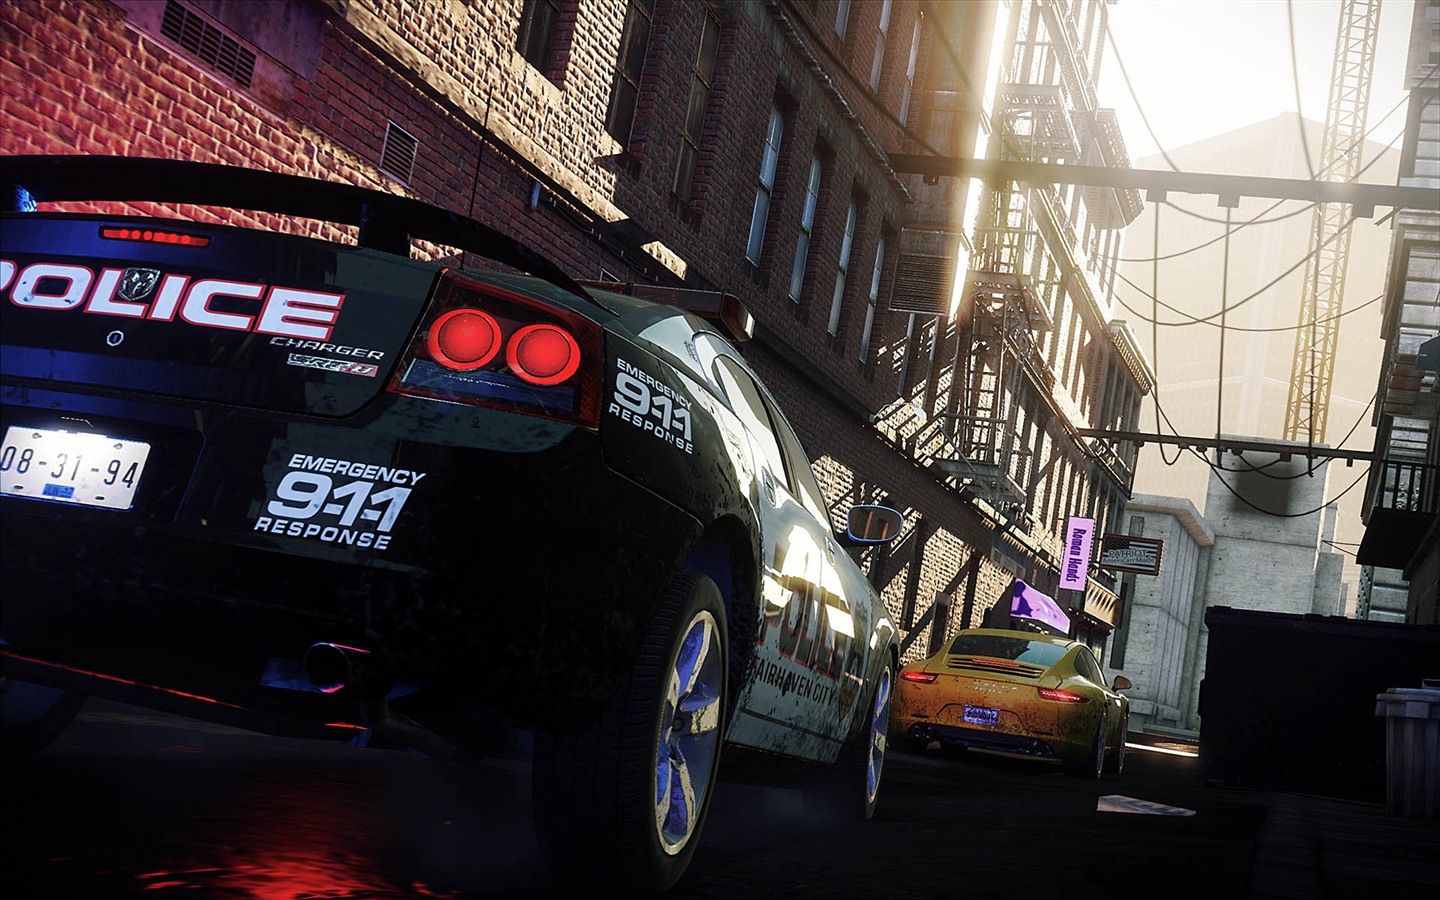 Need for Speed: Most Wanted 极品飞车17：最高通缉 高清壁纸16 - 1440x900